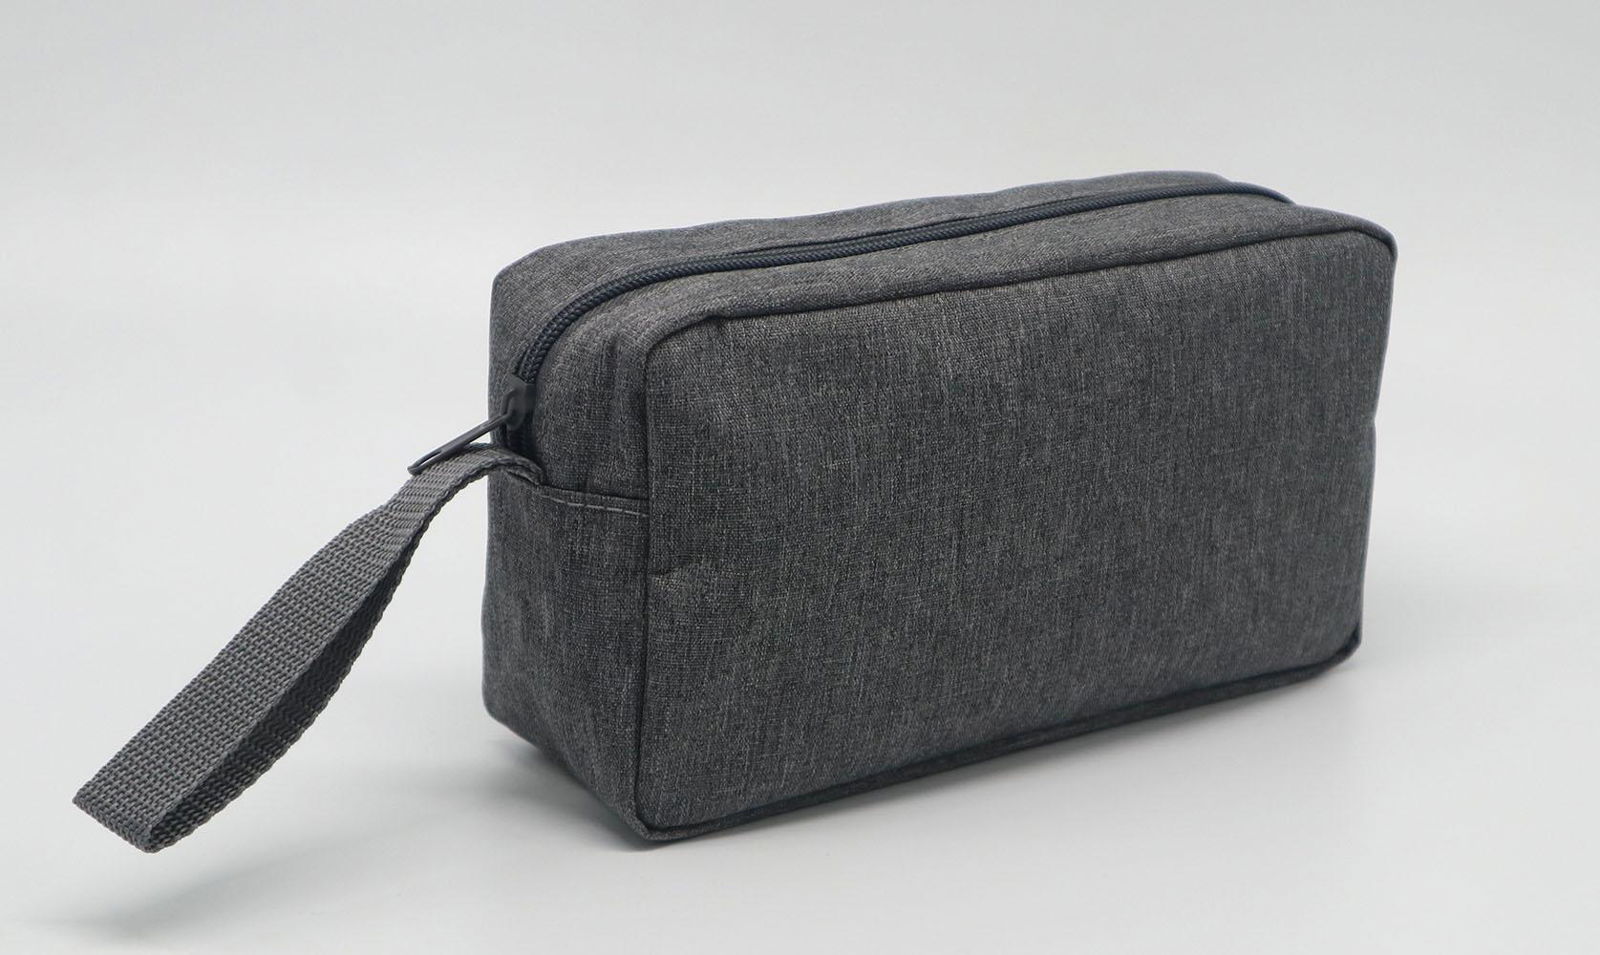 Promotion gift cheap men toiletry bag grey colour polyester made